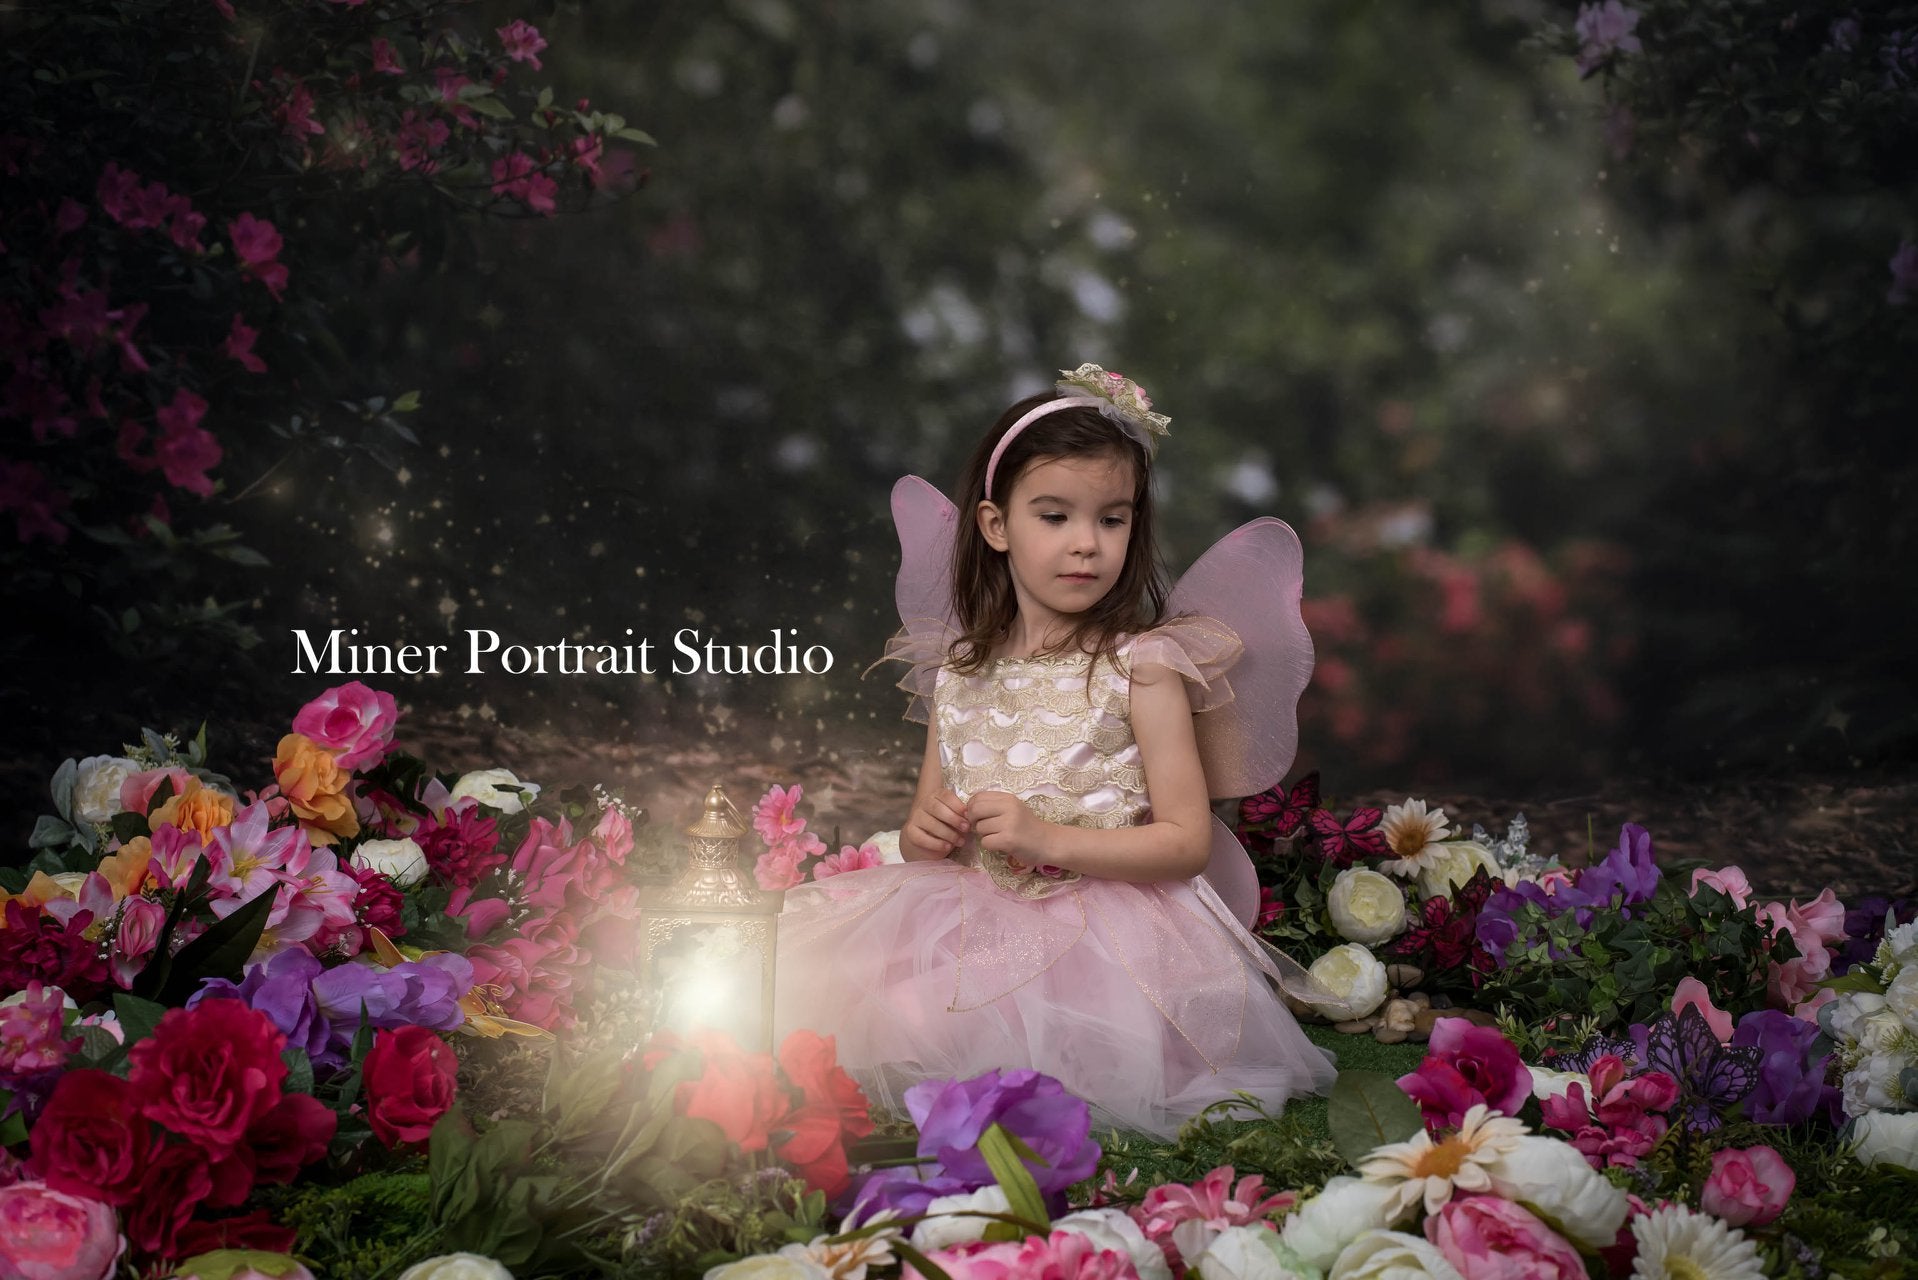 Kate Pink Floral Garden Fairy Lights spring Backdrop for Photography Designed by Pine Park Collection